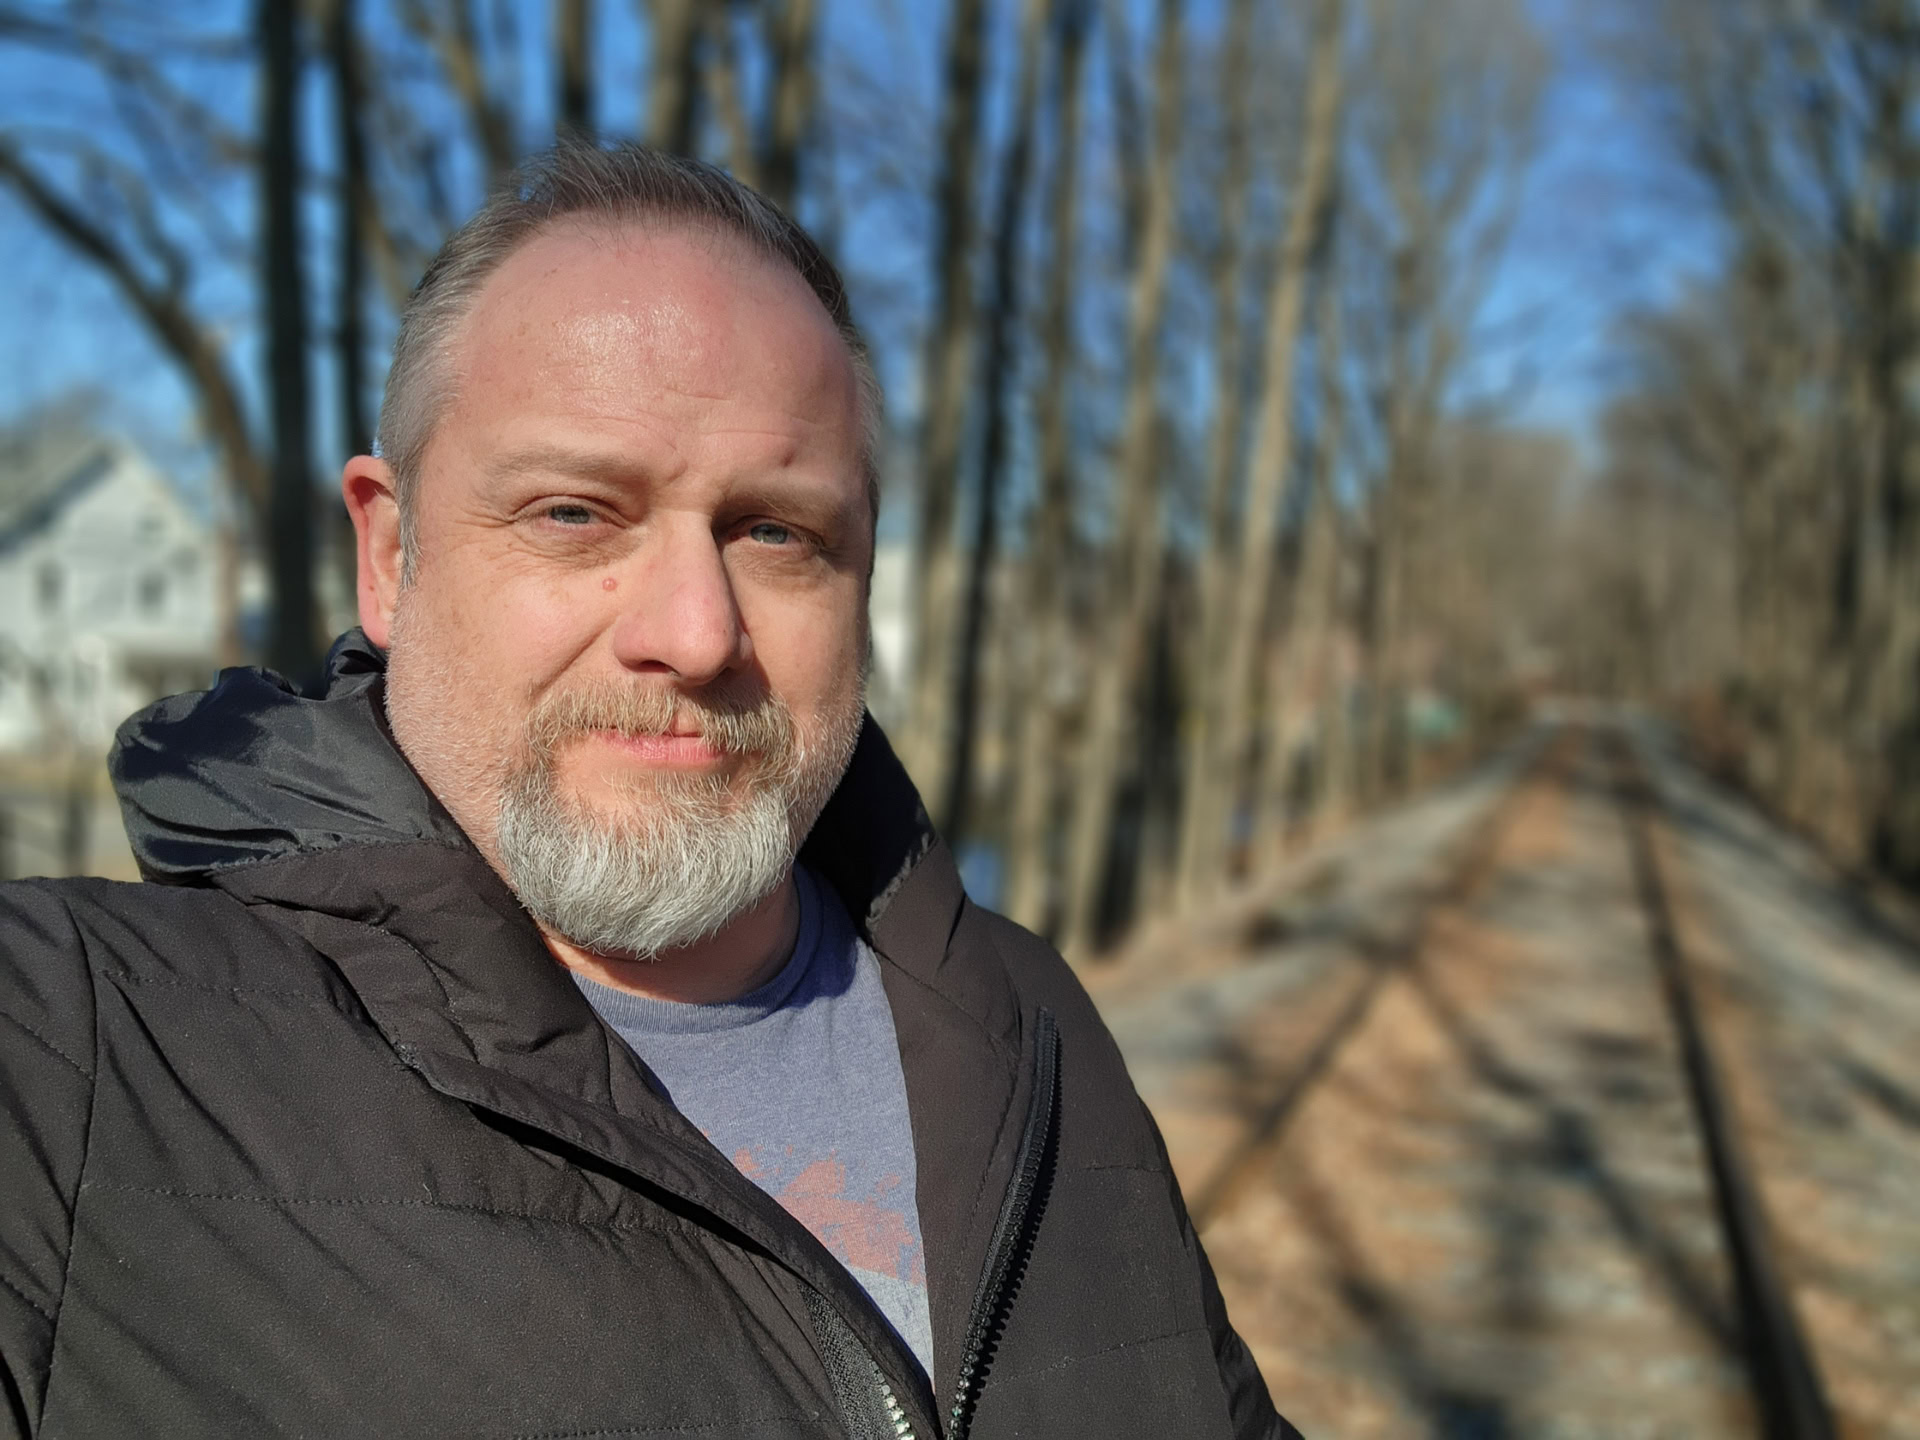 Samsung Galaxy S22 Ultra photo sample selfie portrait of a man with a grey beard outside wearing a grey t-shirt and black jacket.